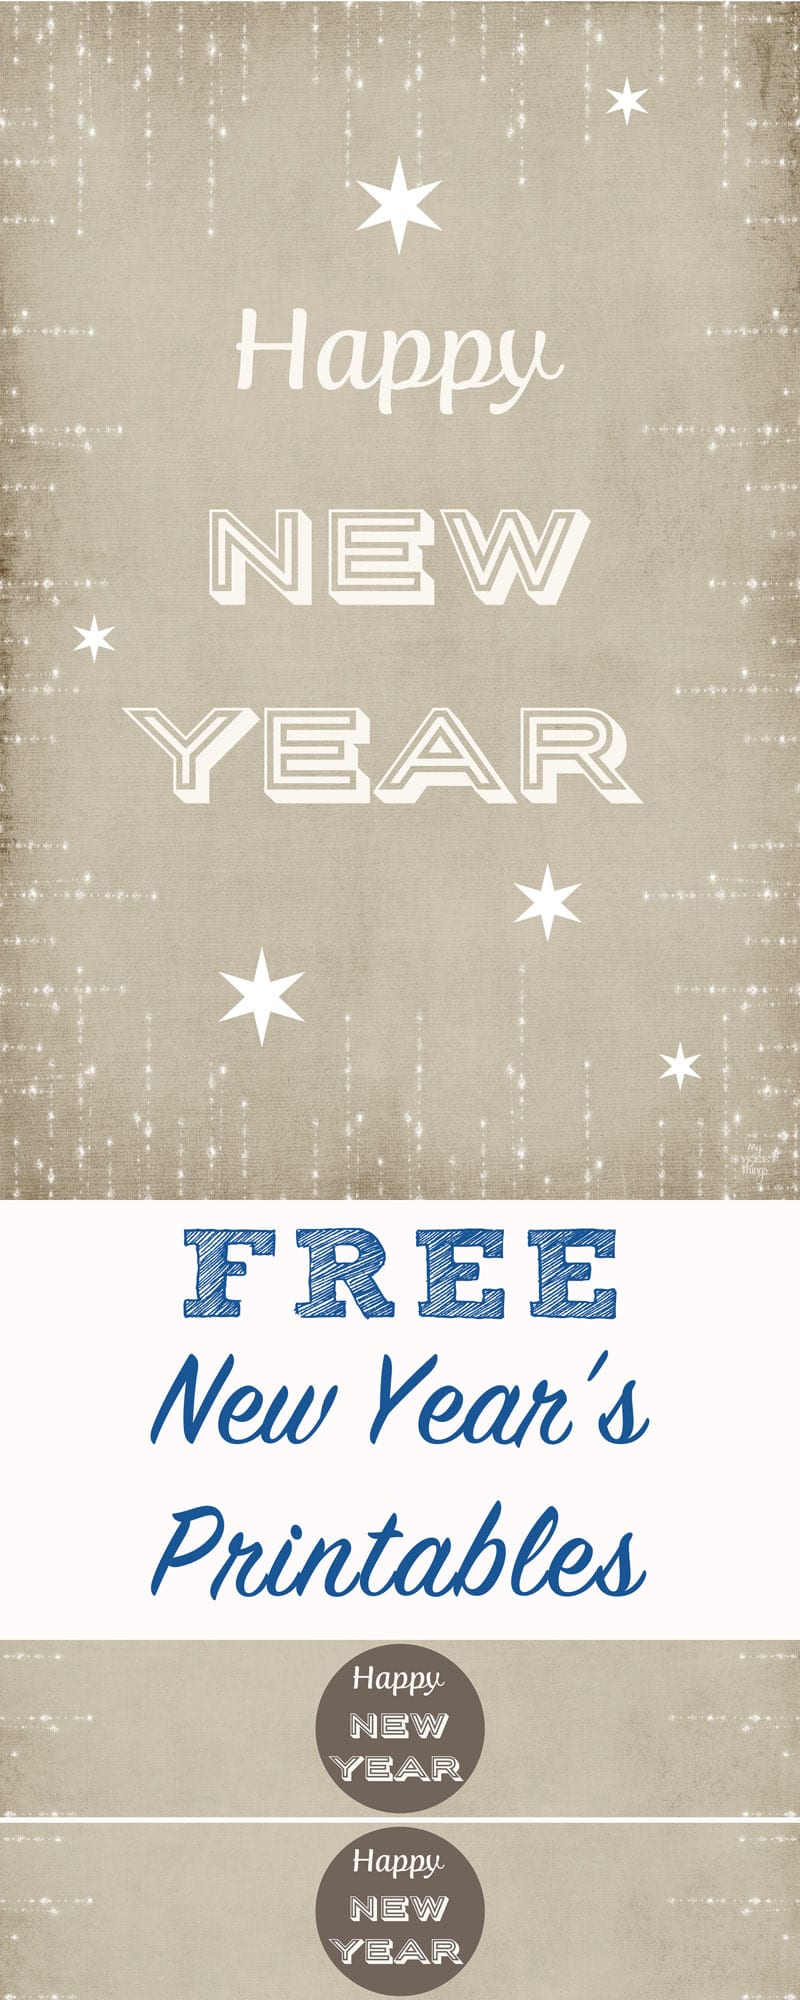 Free New Year's Printables   |    Free download and ready to print to add some decor to your party   |   Via www.sweethings.net